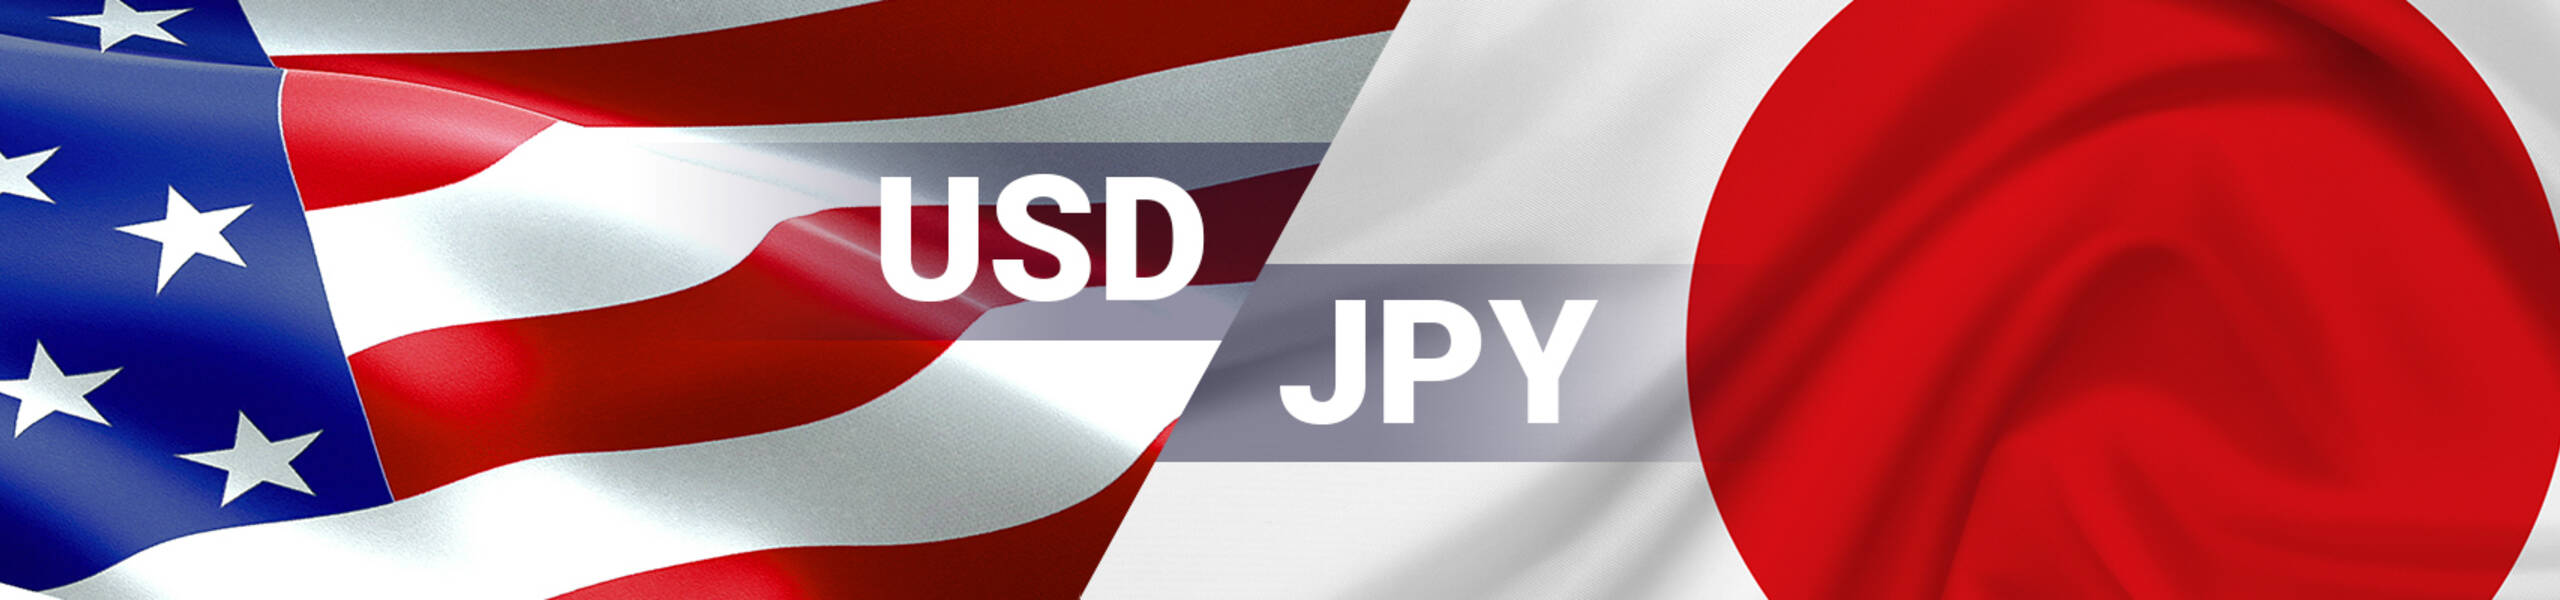 USD/JPY: the Dollar is under strong resistance